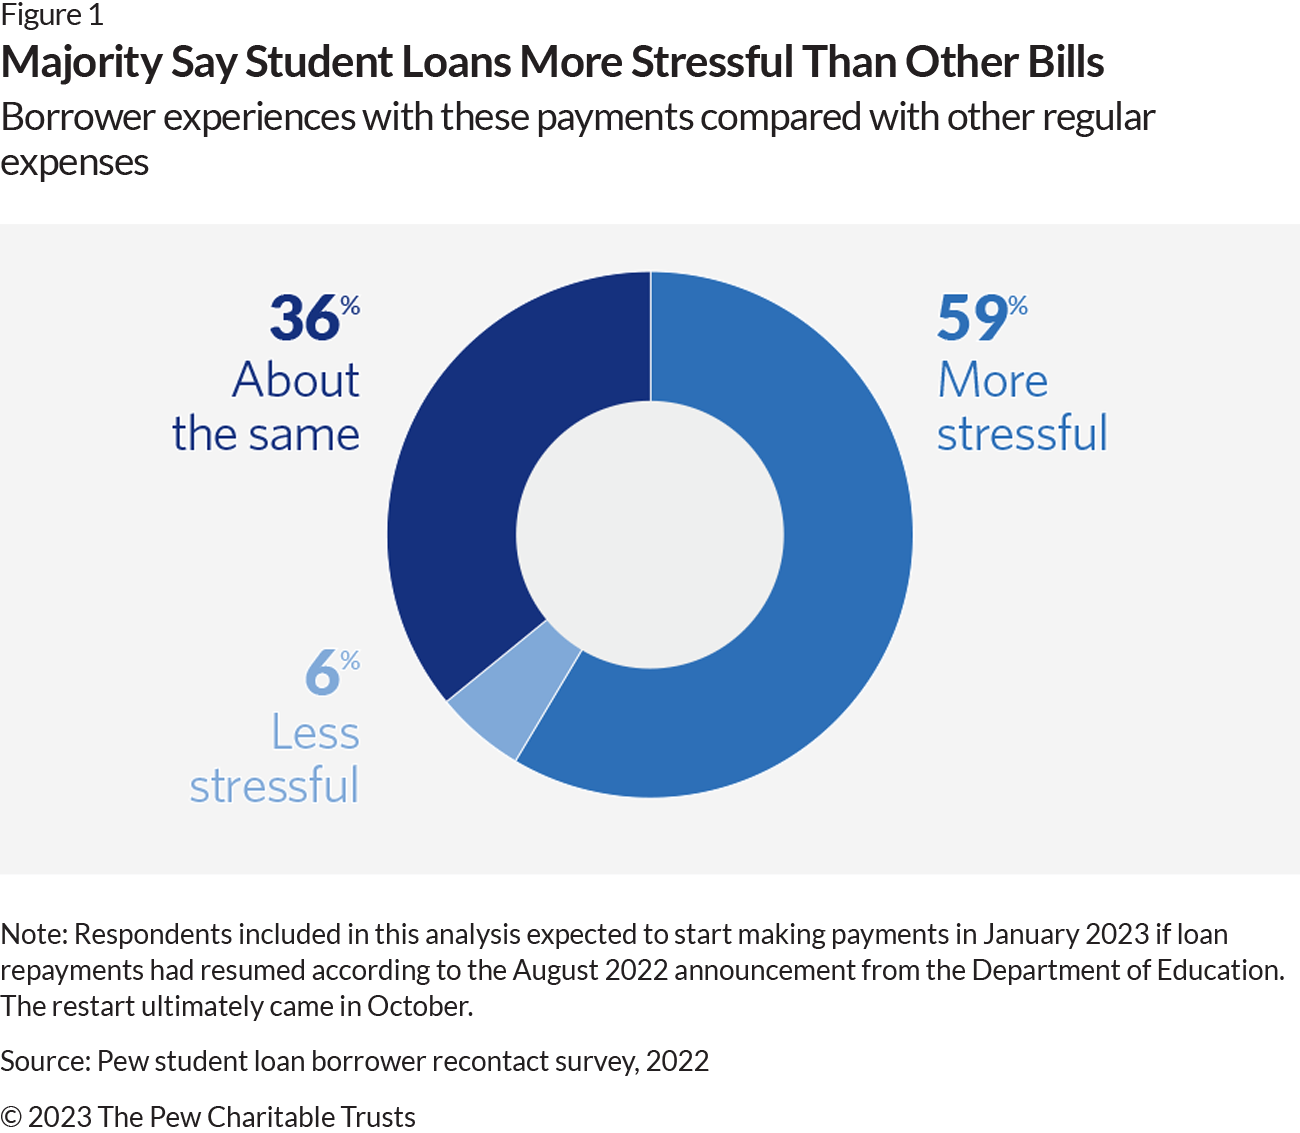 Majority Say Student Loans More Stressful Than Other Bills: Borrower experience with these payments compared with other regular expenses: 59% More stressful, 36% About the same, and 6% Less stressful